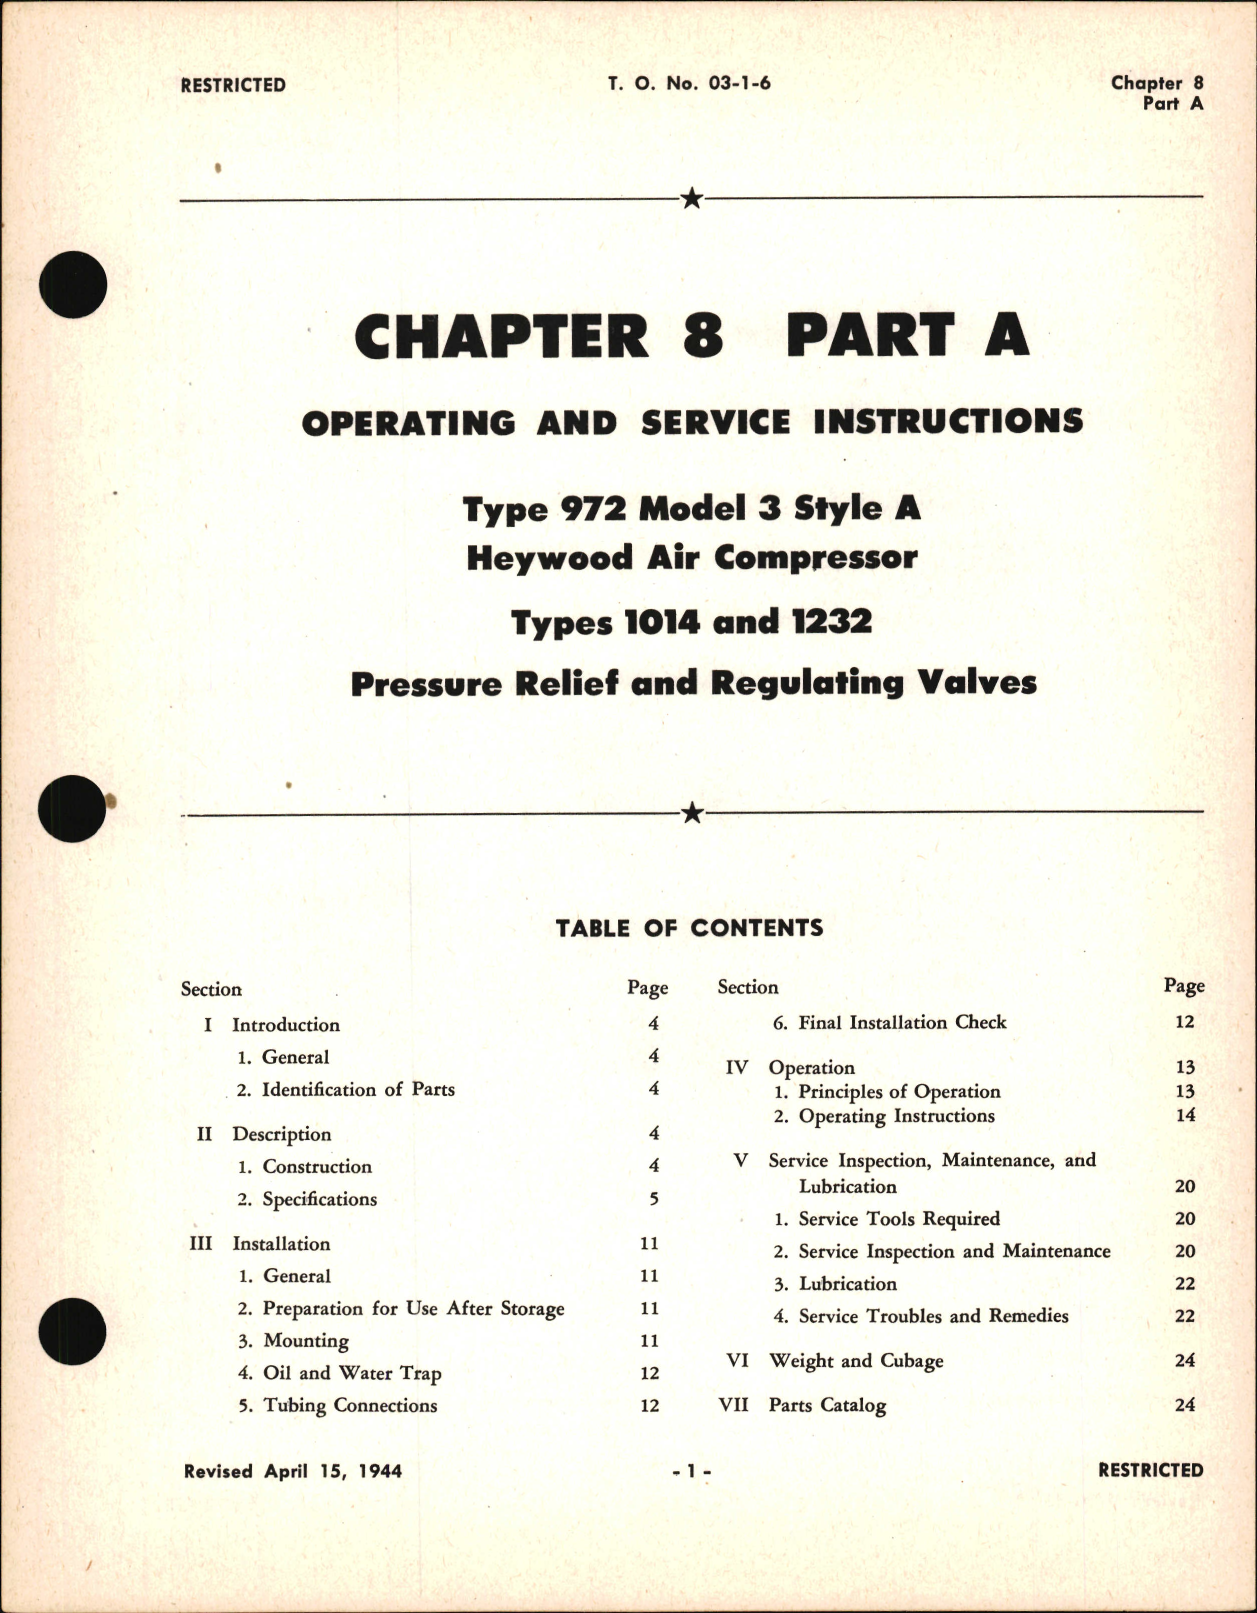 Sample page 1 from AirCorps Library document: Operating and Service Instructions for Heywood Air Compressor, Pressure Relief and Regulating Valves